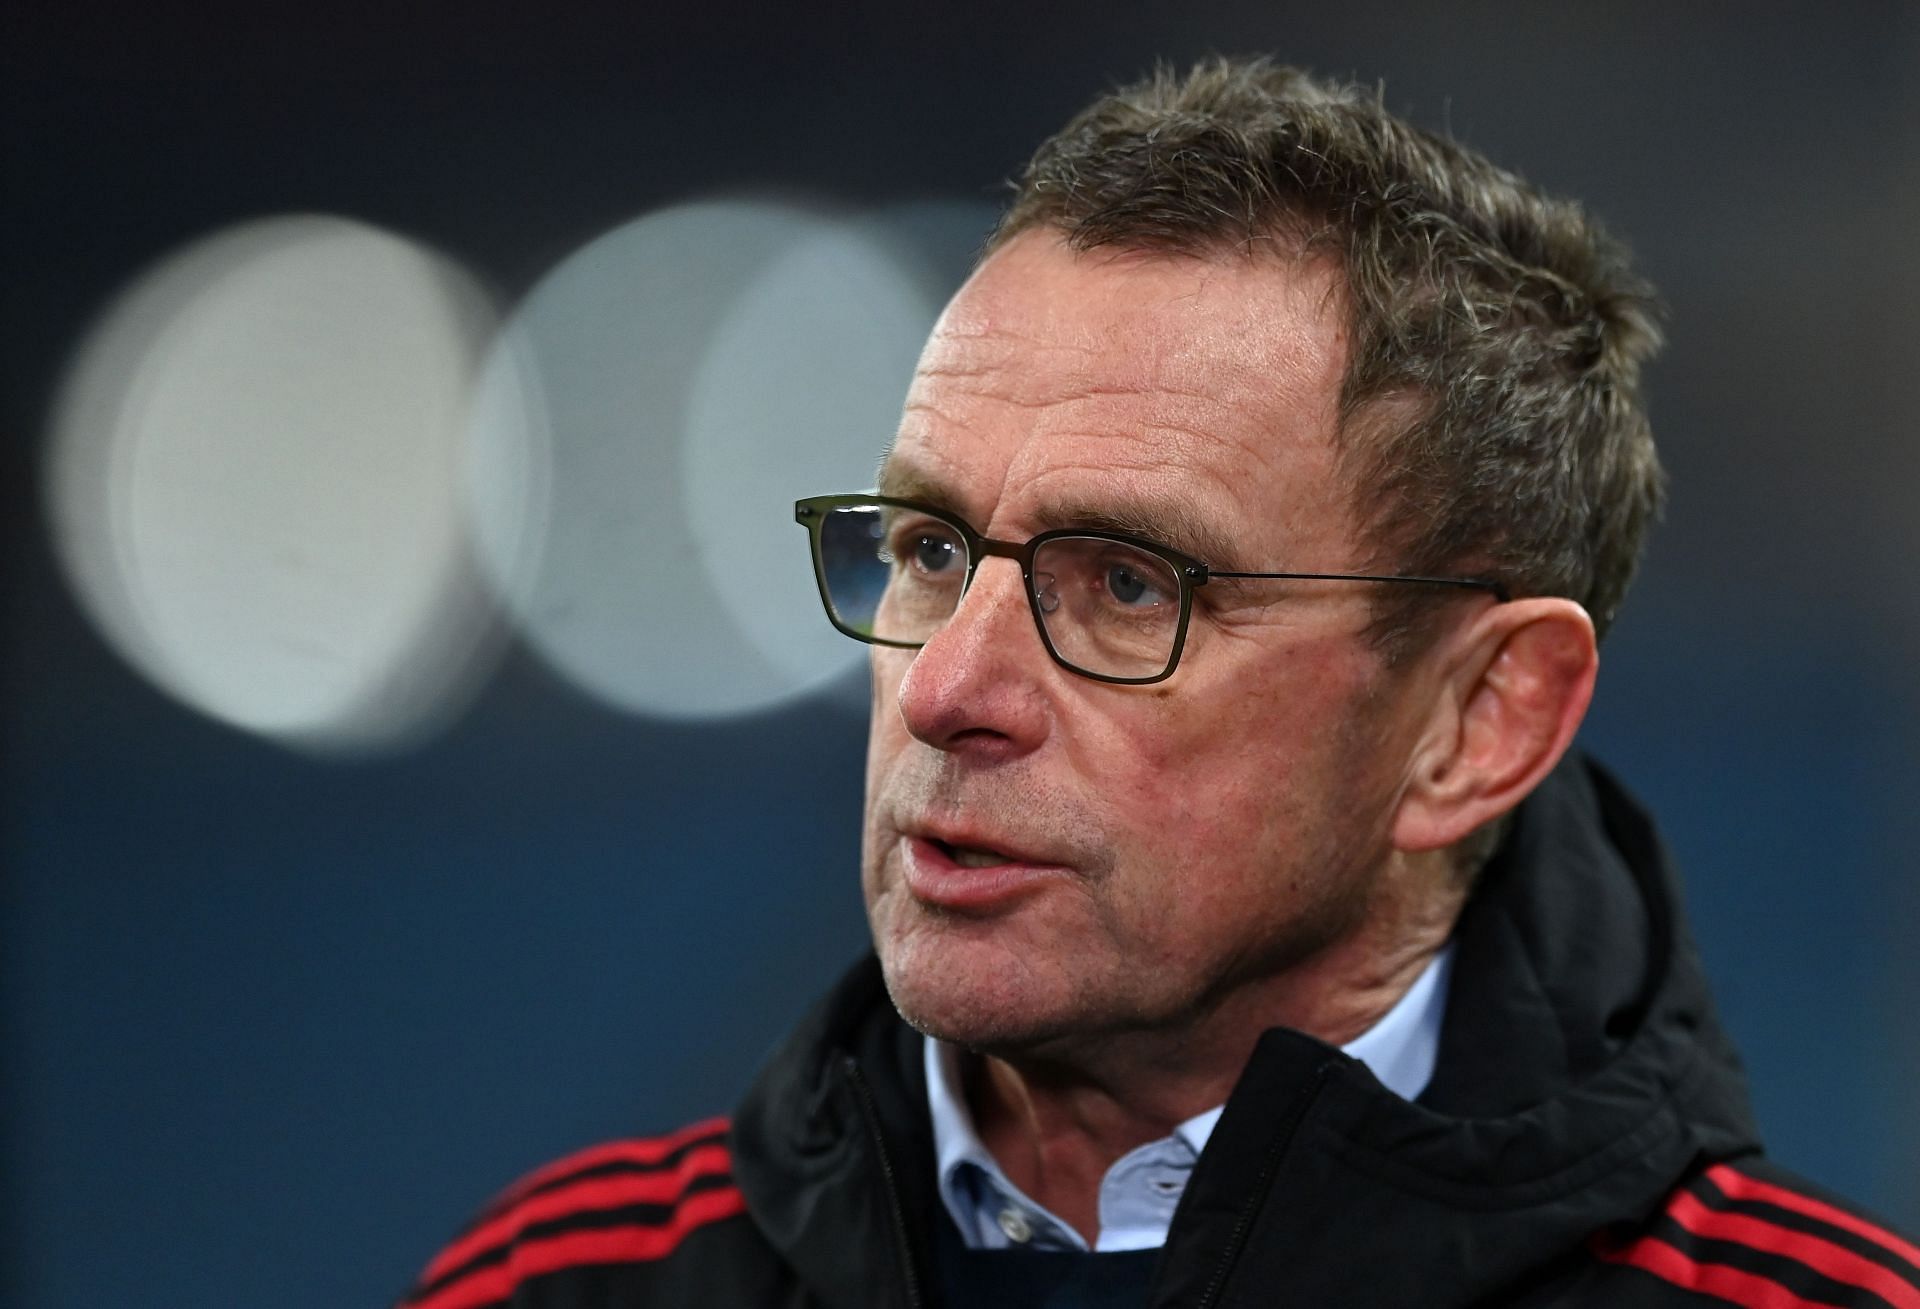 Ralf Rangnick speaks to the media after the Aston Villa vs Manchester United game.